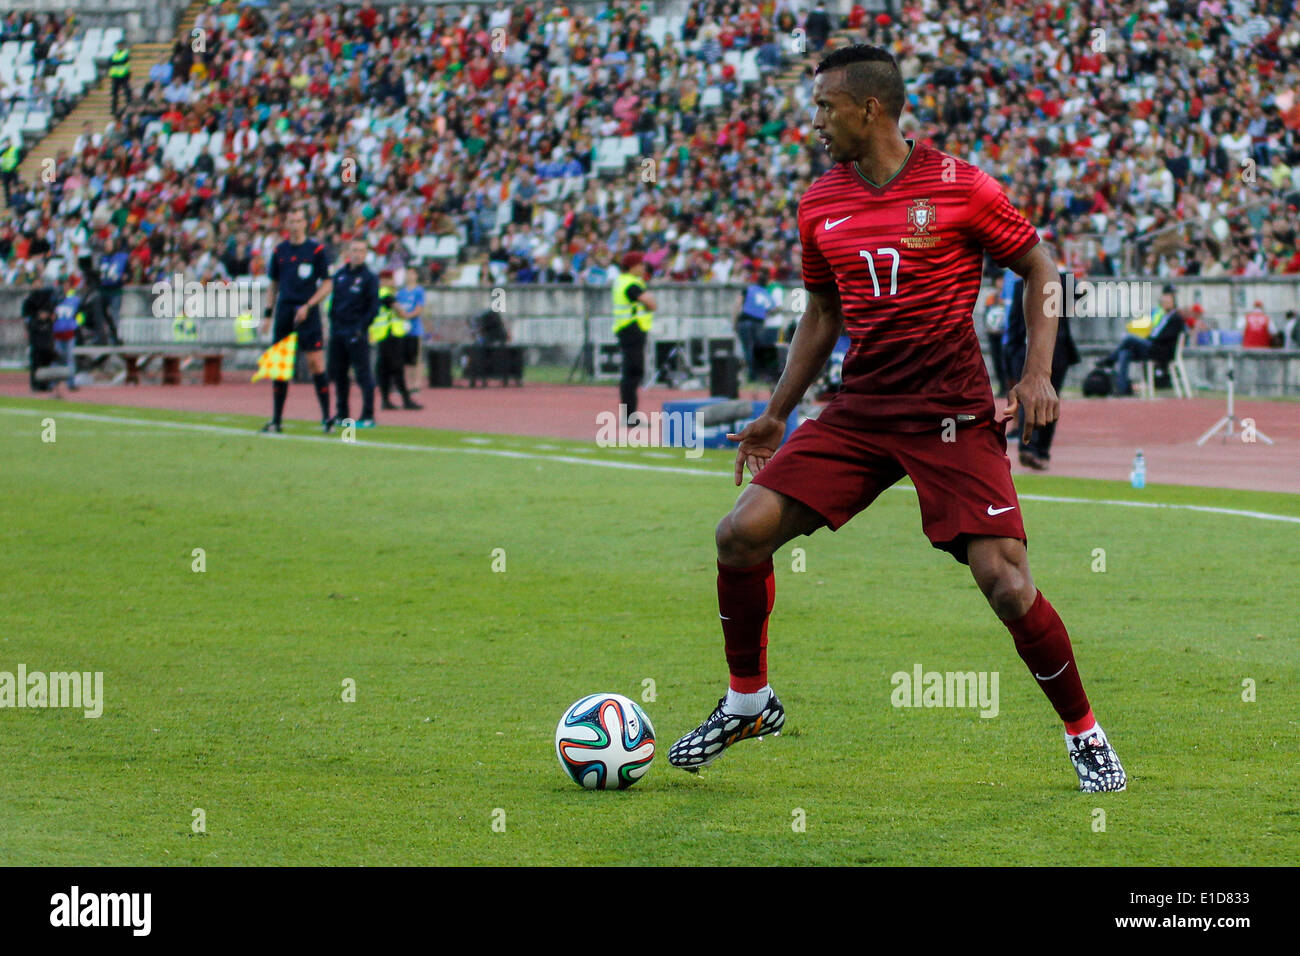 Lisbon, Porrtugal. 31st May, 2014. Portugal forward Nani (17) during preparatory friendly match for the World Cup at the National Stadium in Lisbon, Portugal, Saturday, May 31, 2014. Credit:  Leonardo Mota/Alamy Live News Stock Photo